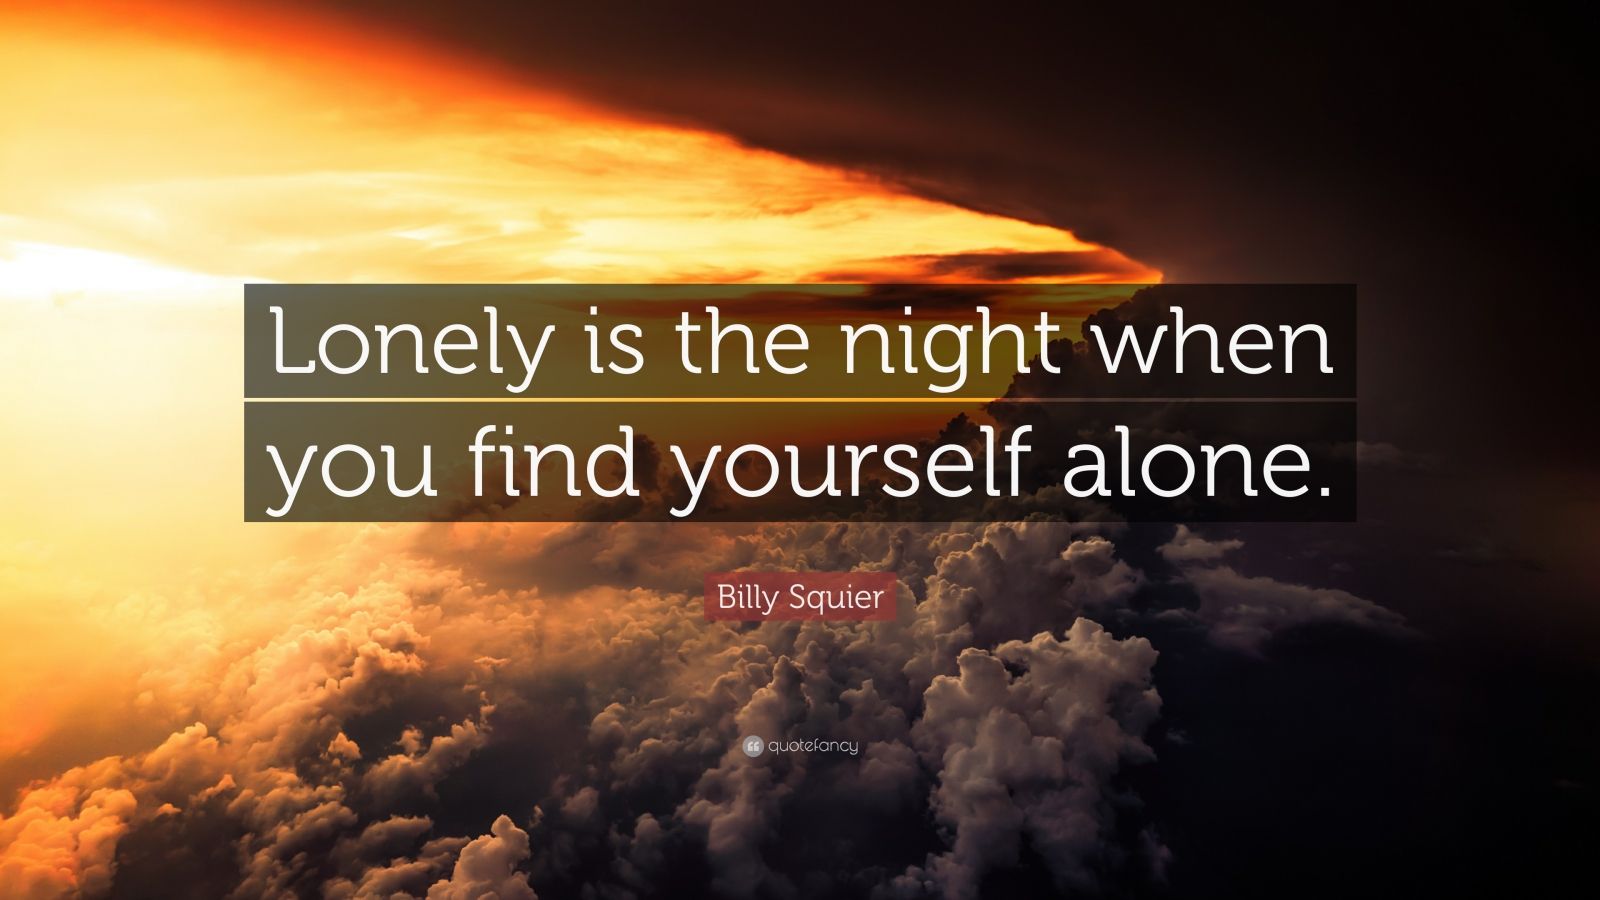 Billy Squier Quote: “Lonely is the night when you find yourself alone ...